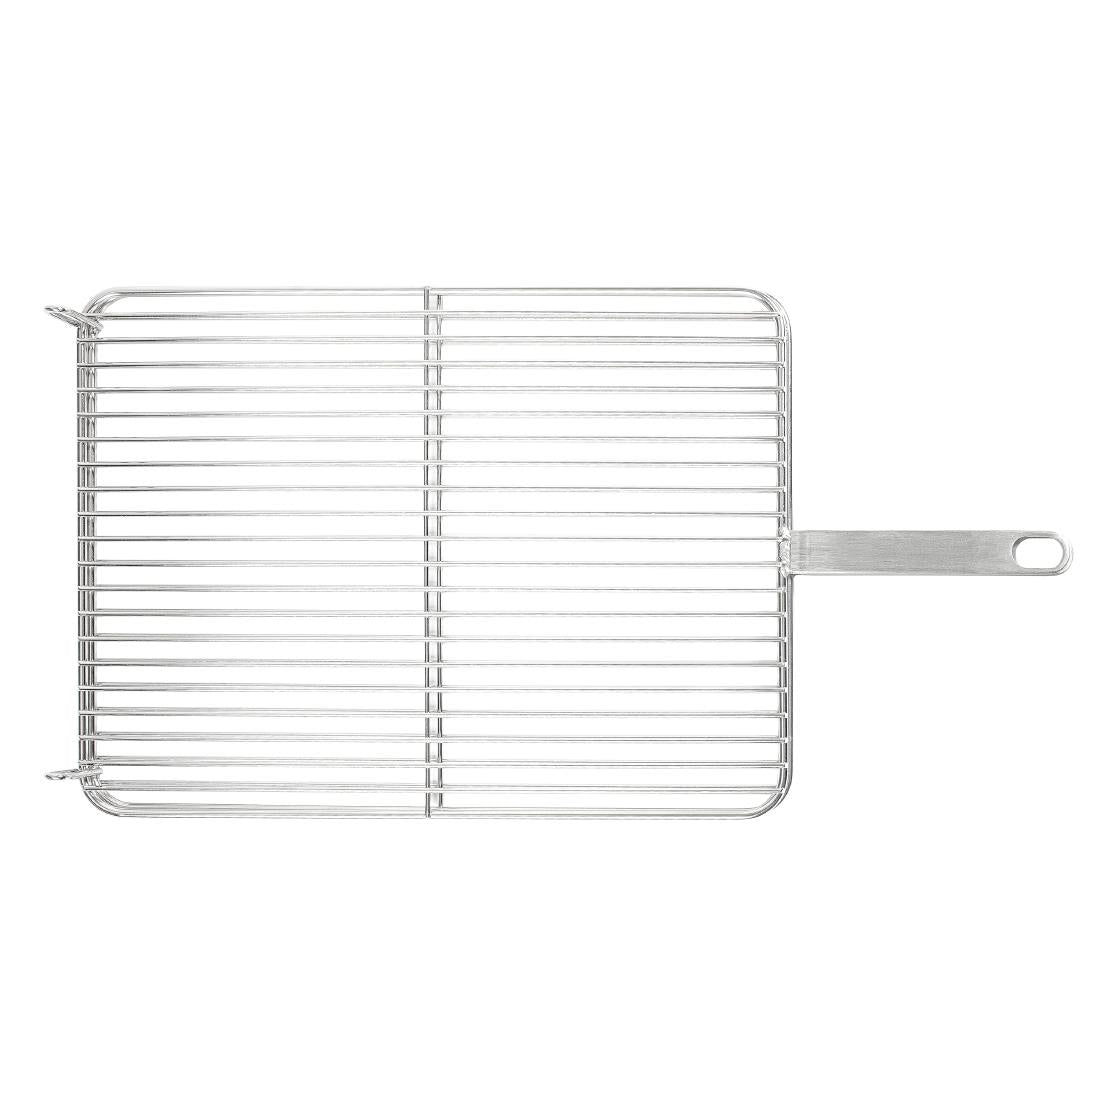 AT306 Josper Charcoal Oven Mini Grill Grate with Grip 150x250mm